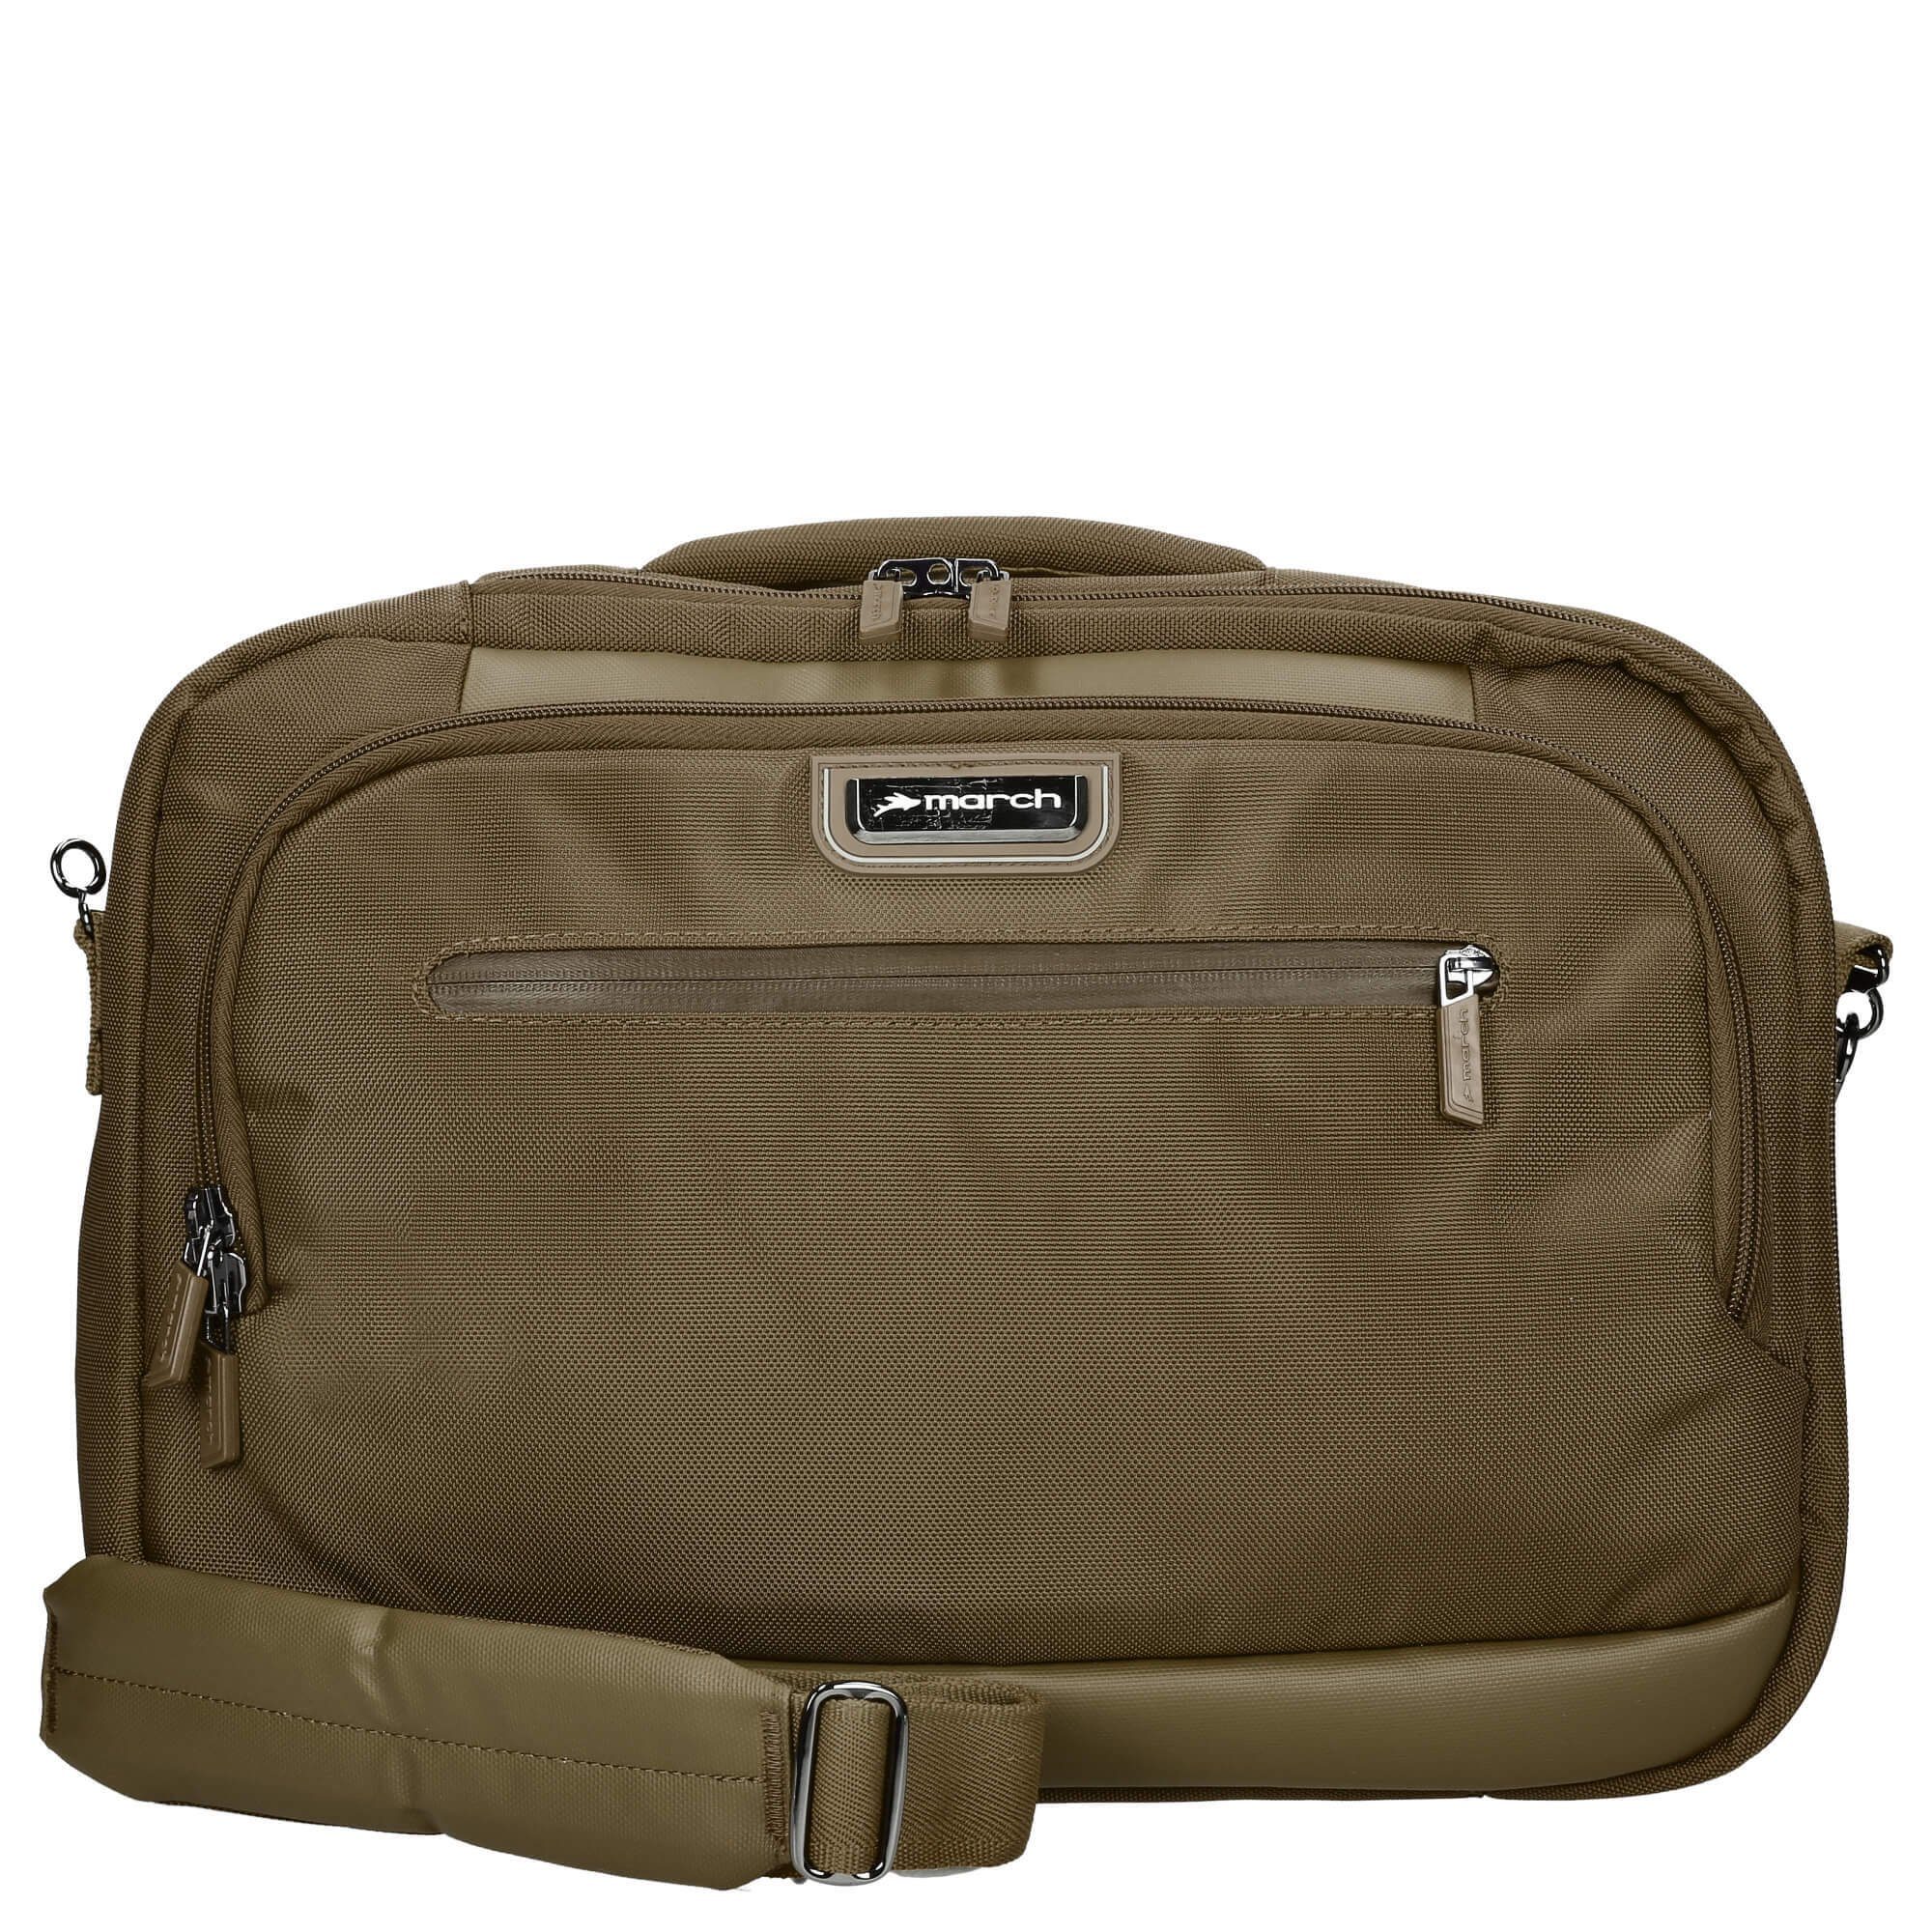 cm - Away bronze 42 Businesstasche Trading Laptoptasche Bags Rolling March15 take